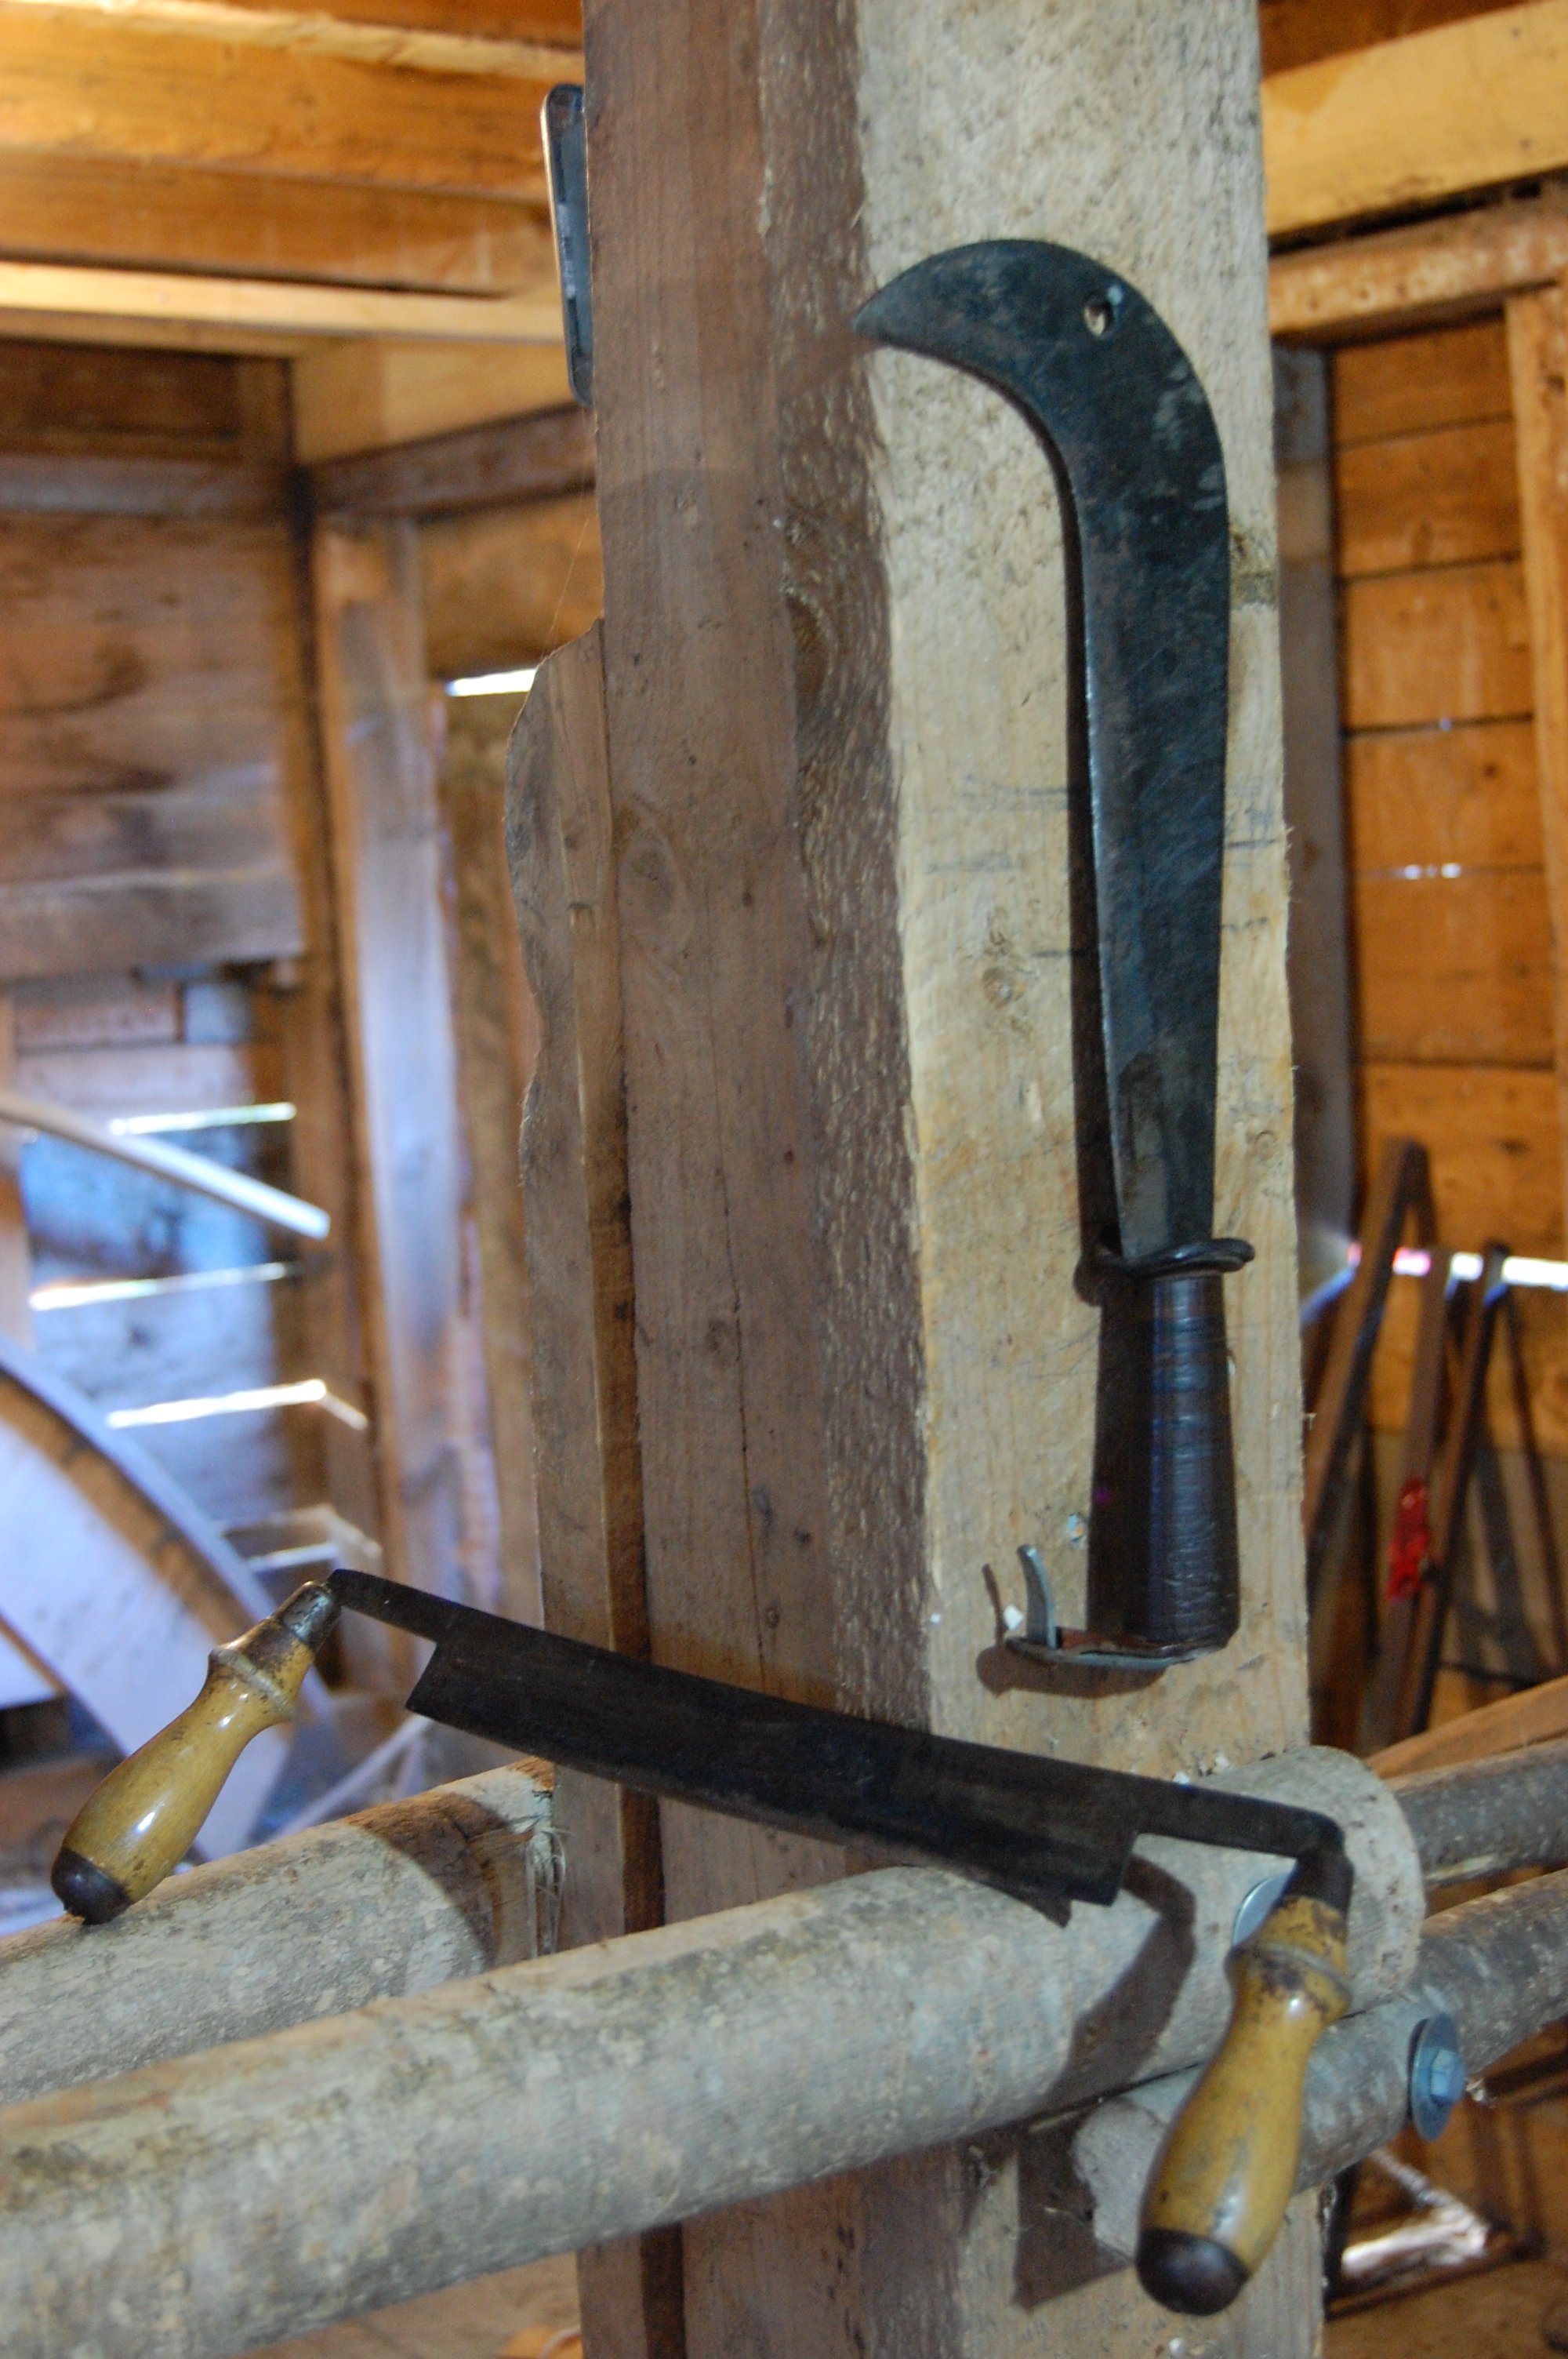 Green wood working tools are used to fashion our yurts.  